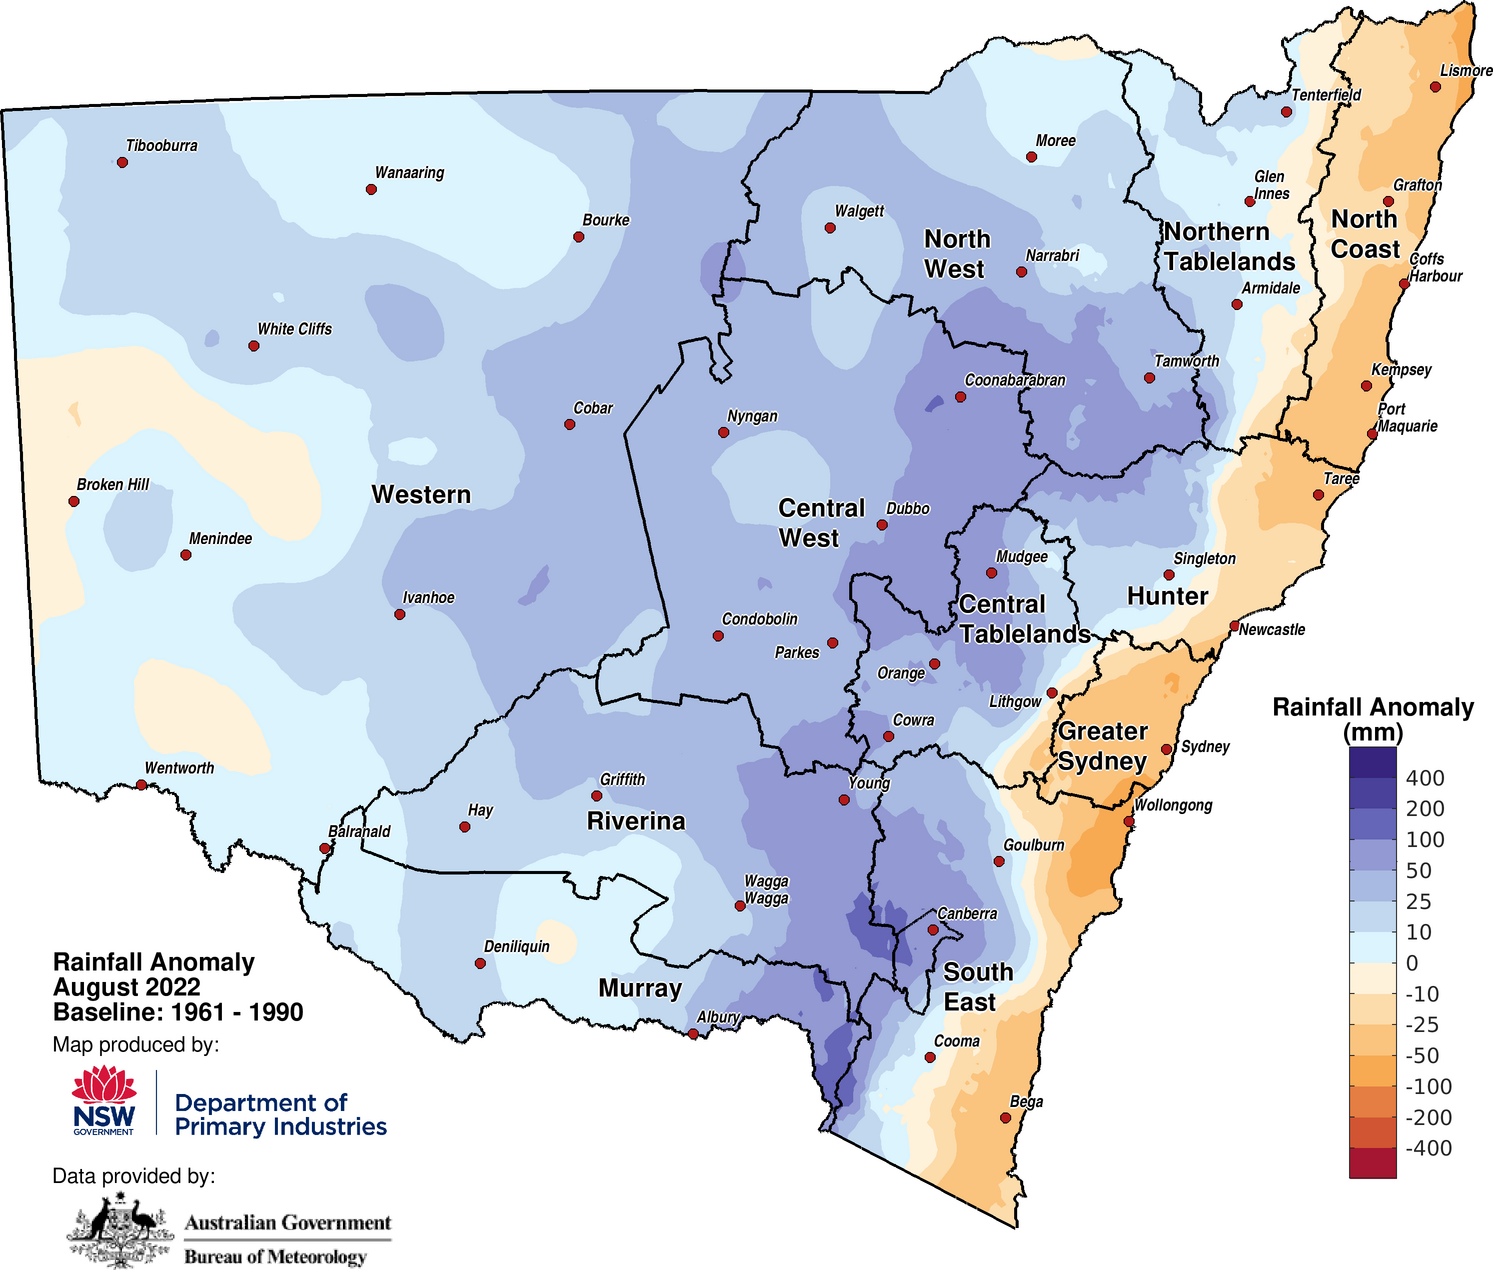 Figure 2a. Rainfall anomaly – August 2022